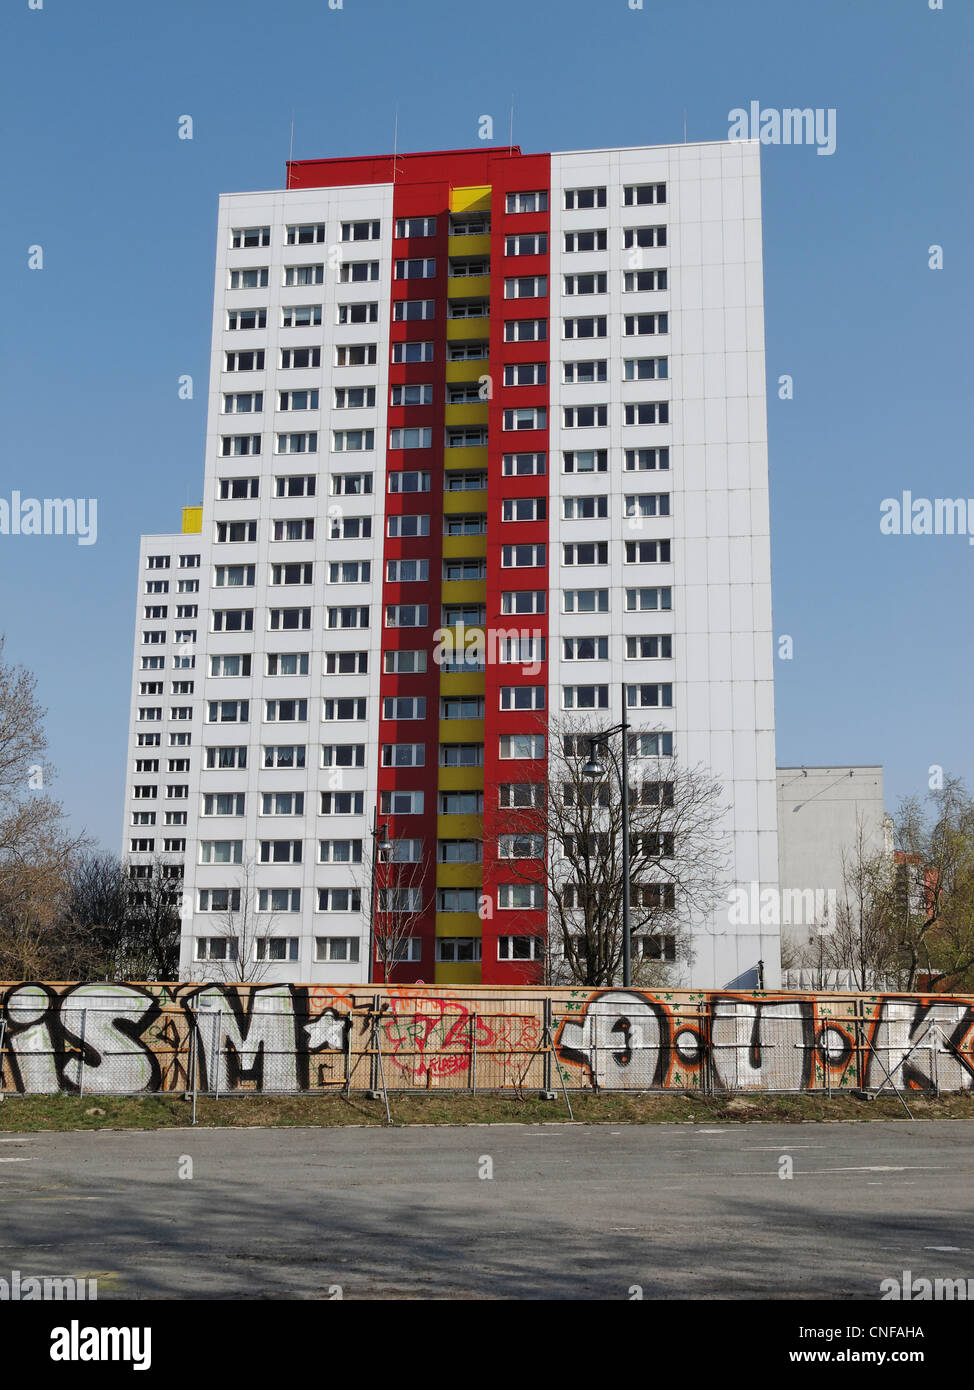 A block of flats in the former East Berlin, Germany. Stock Photo